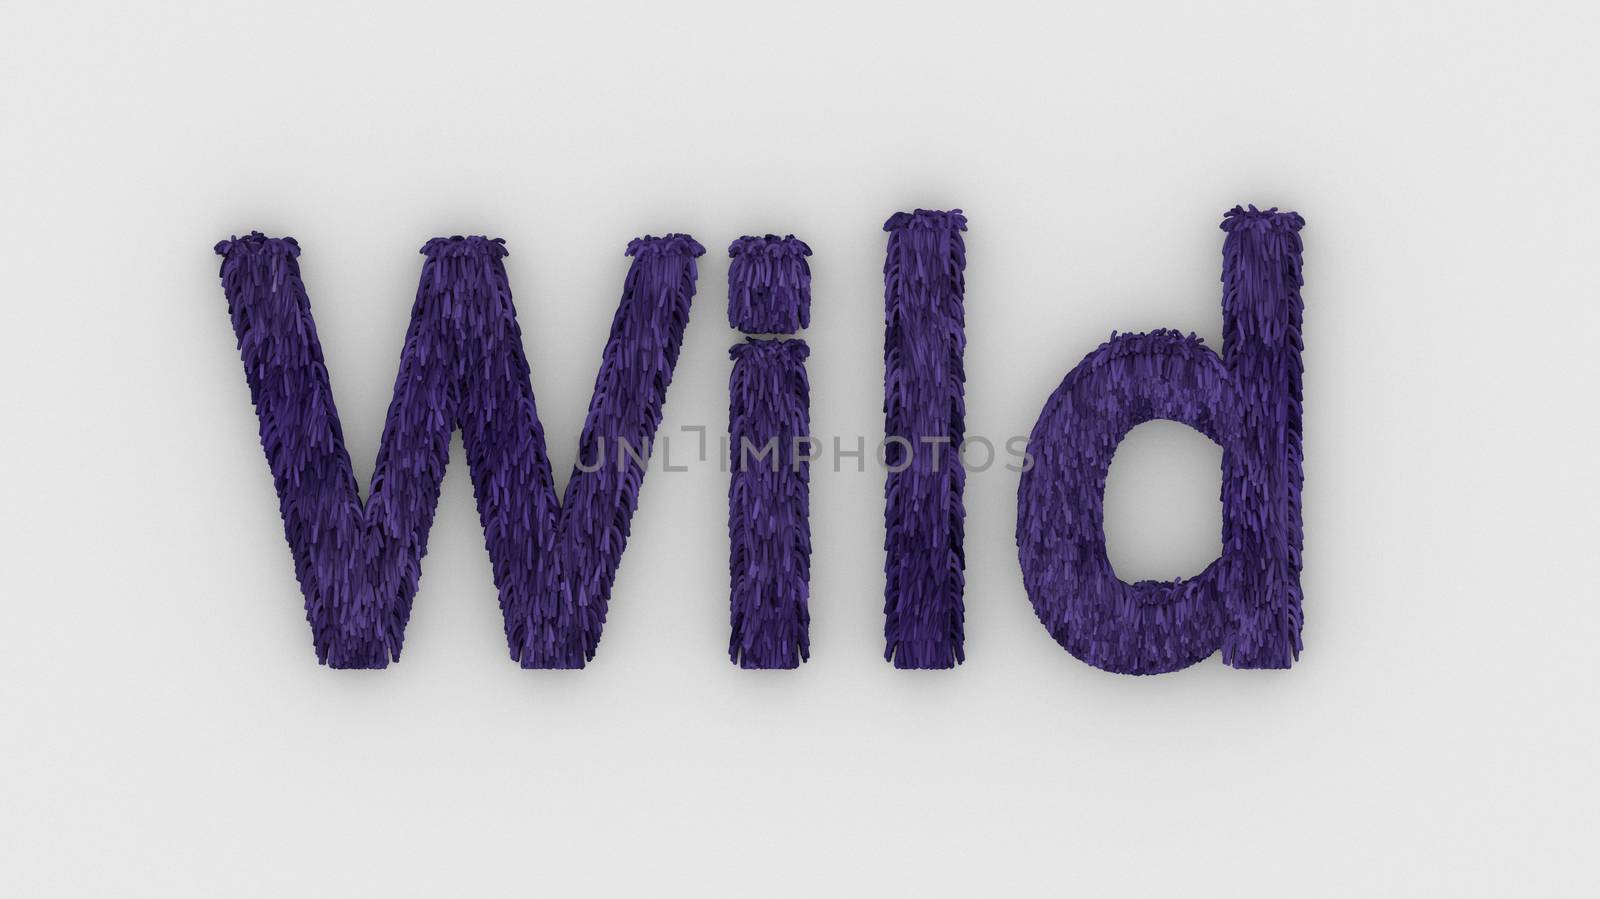 Wild - 3d word violet on white background. render furry letters. hair. wilds fur. emblem logo design template. wild animals, feeling and relationships. beasts of nature by Andreajk3